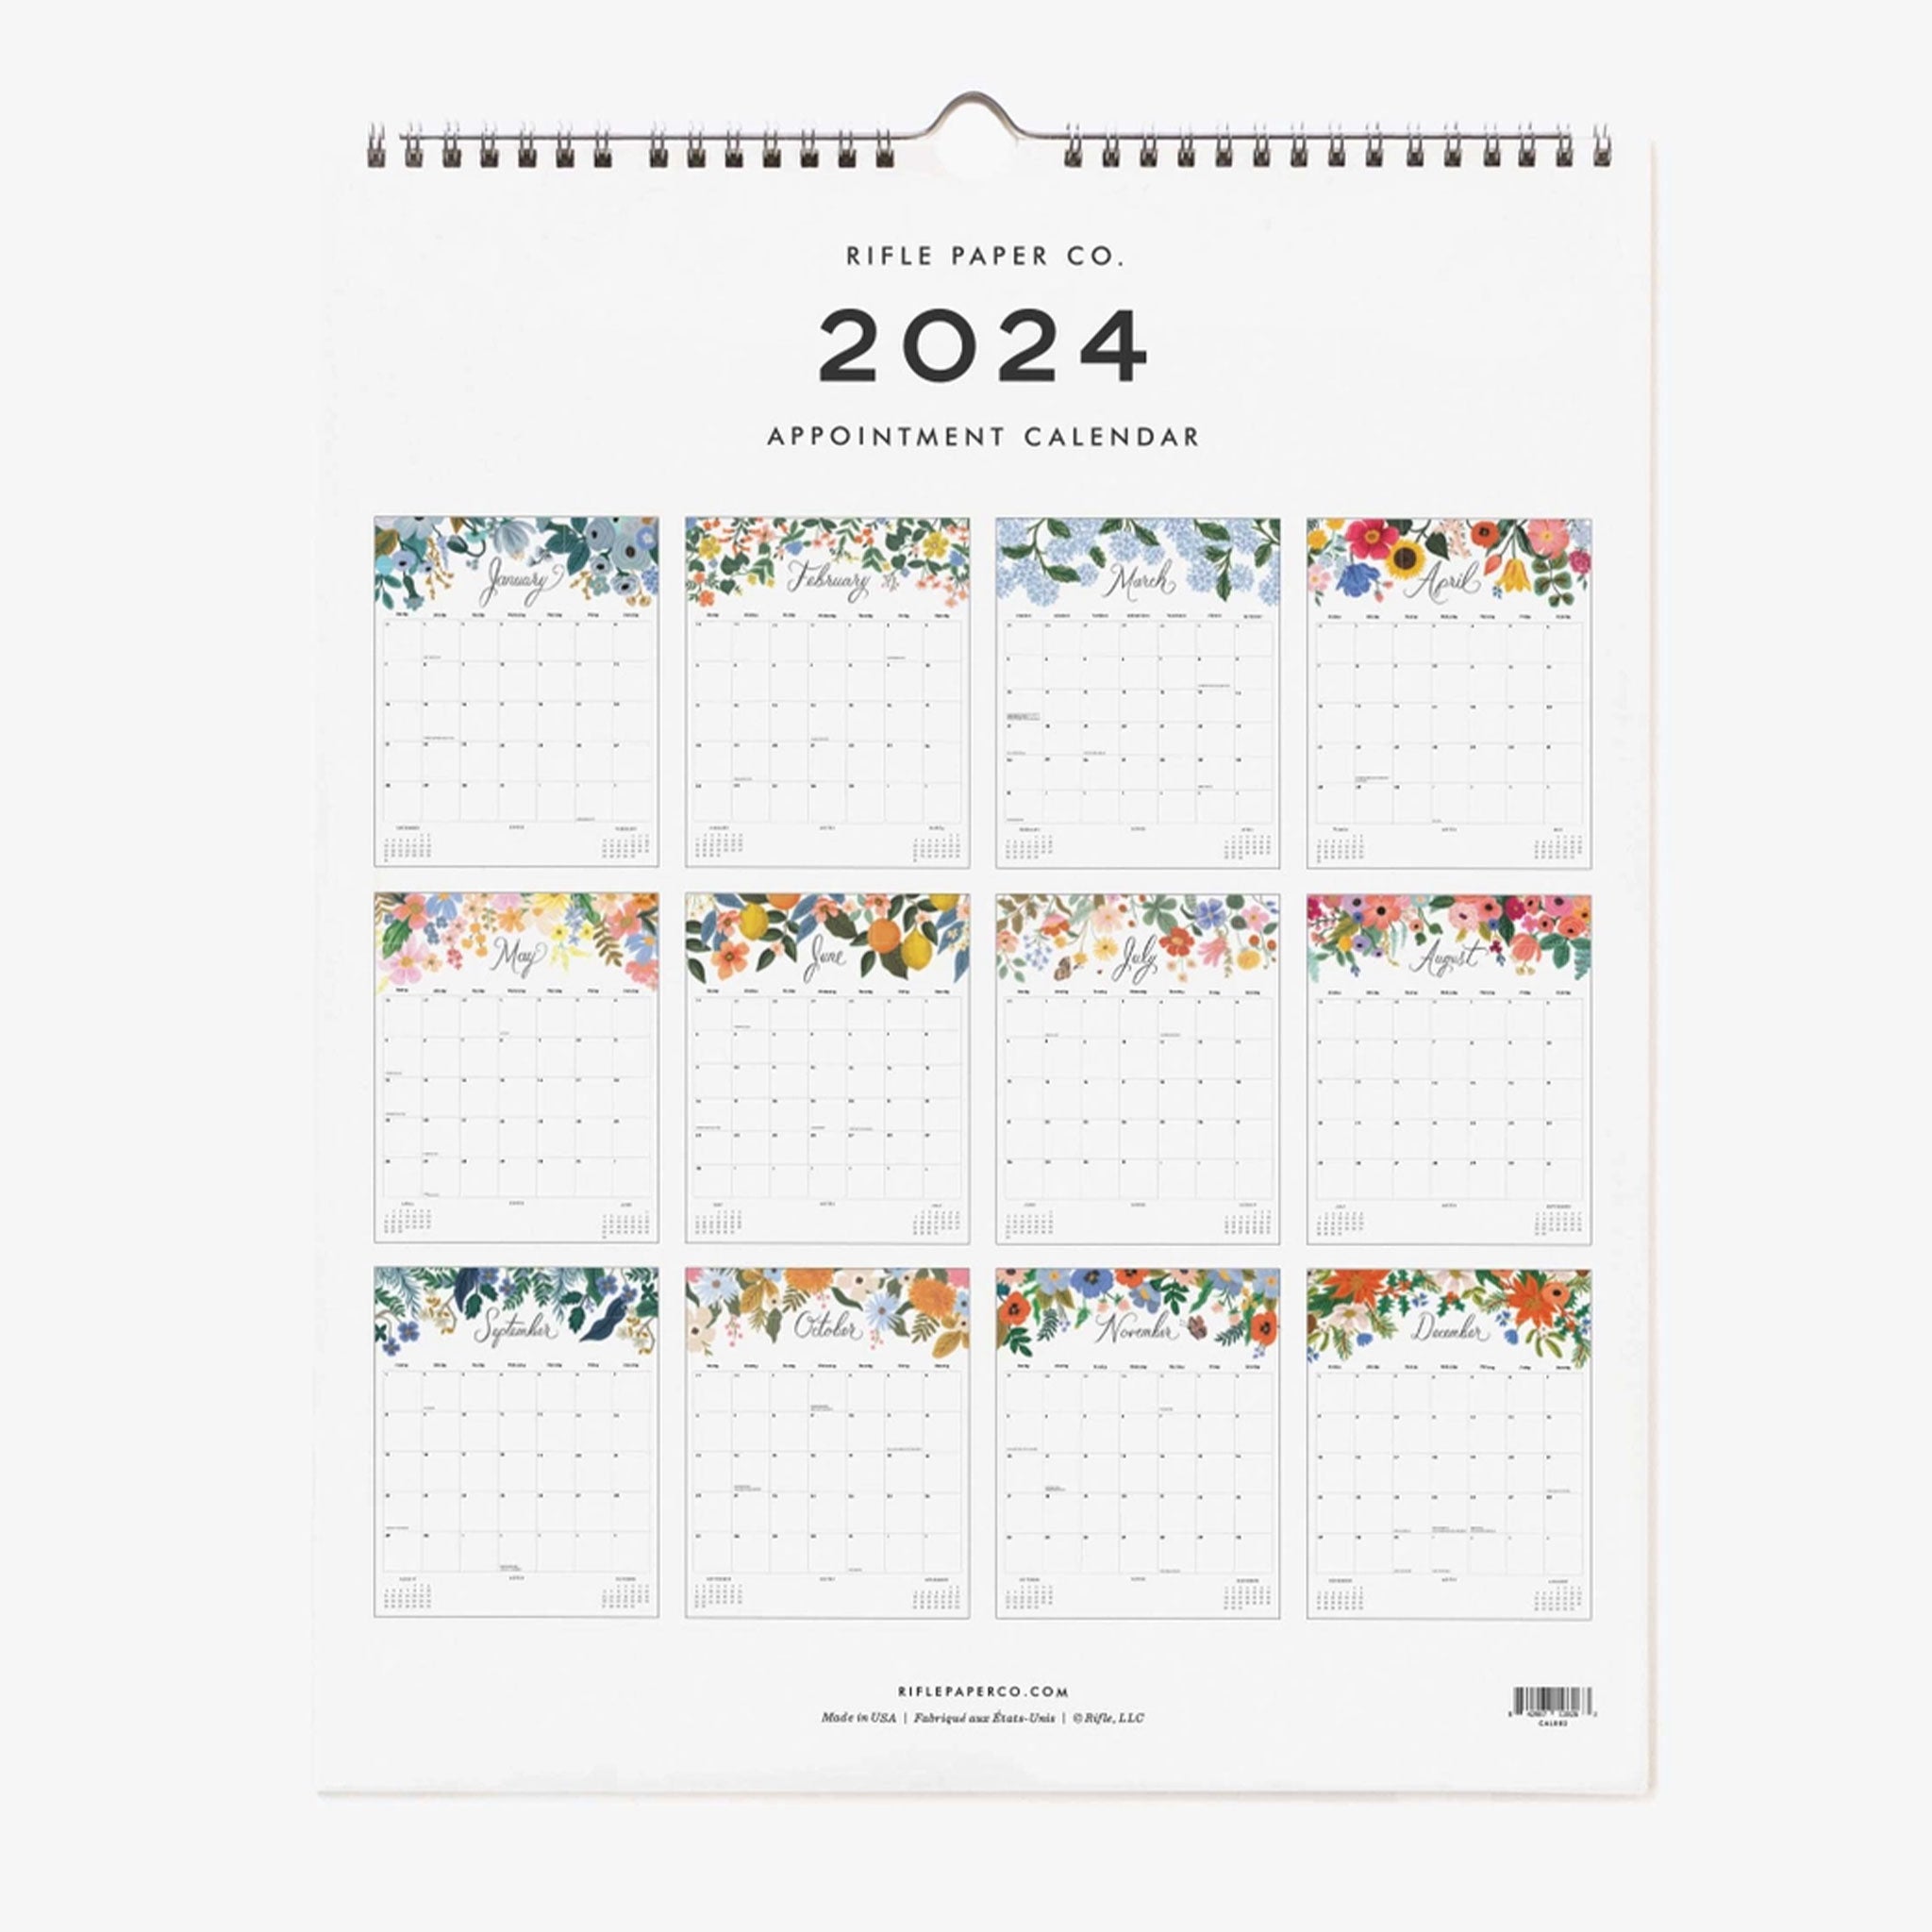 The back of the calendar showing all the months and their designs. 